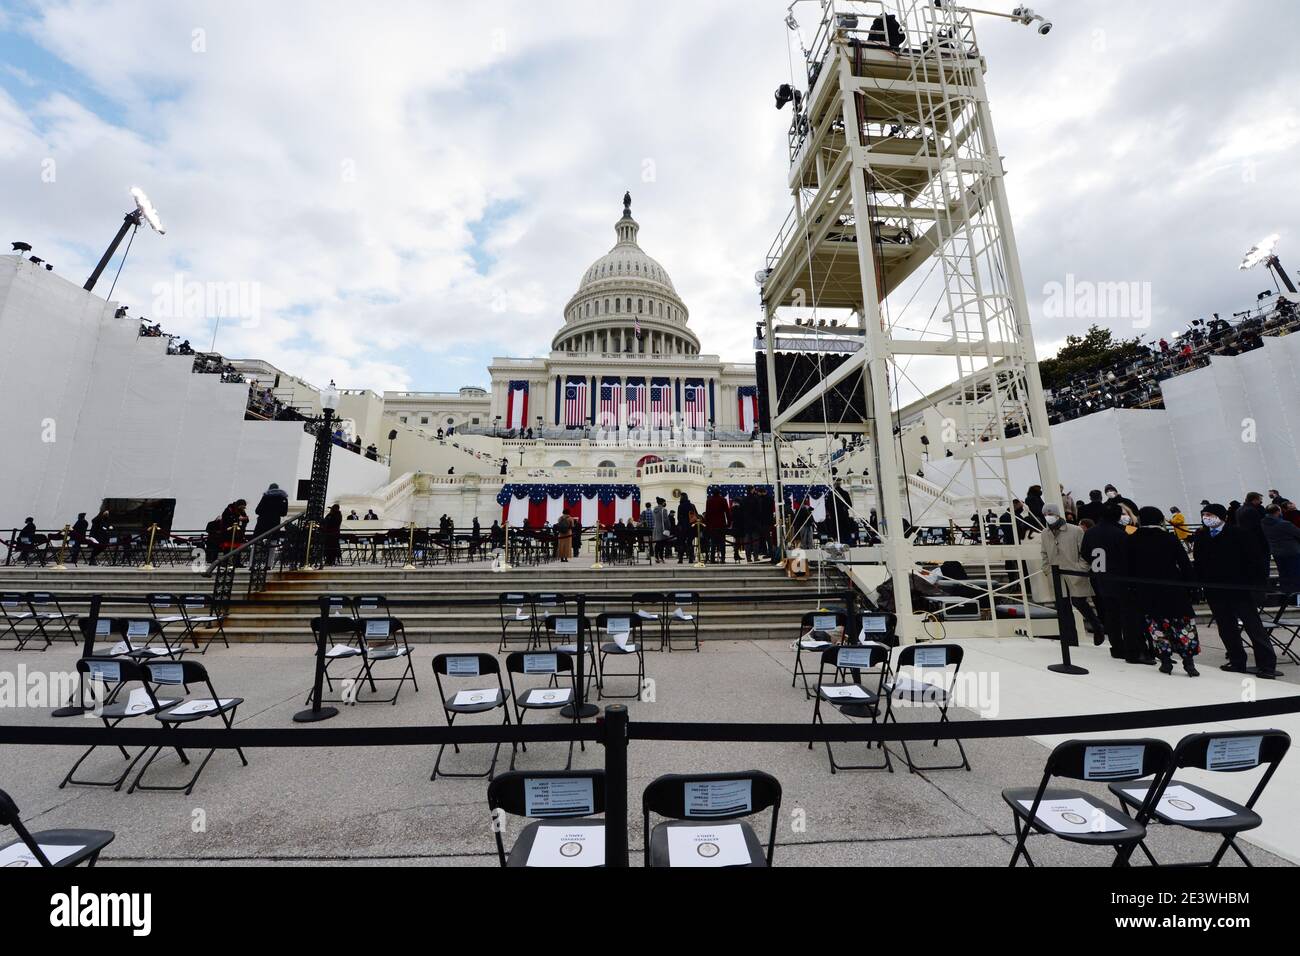 Washington, DC, USA. 20th Jan, 2021. 1/20/20- U.S. Capitol- Washington DC.The U.S.Capitol hosts the Inauguration of the 46th President of The United States Joseph R. Biden.The celebration was scaled down with socially distant measures put into place as the COVID Pandemic continues . Extra security is also in place due to the insurgence that took place at the Capitol two weeks earlier. Credit: Christy Bowe/ZUMA Wire/Alamy Live News Stock Photo